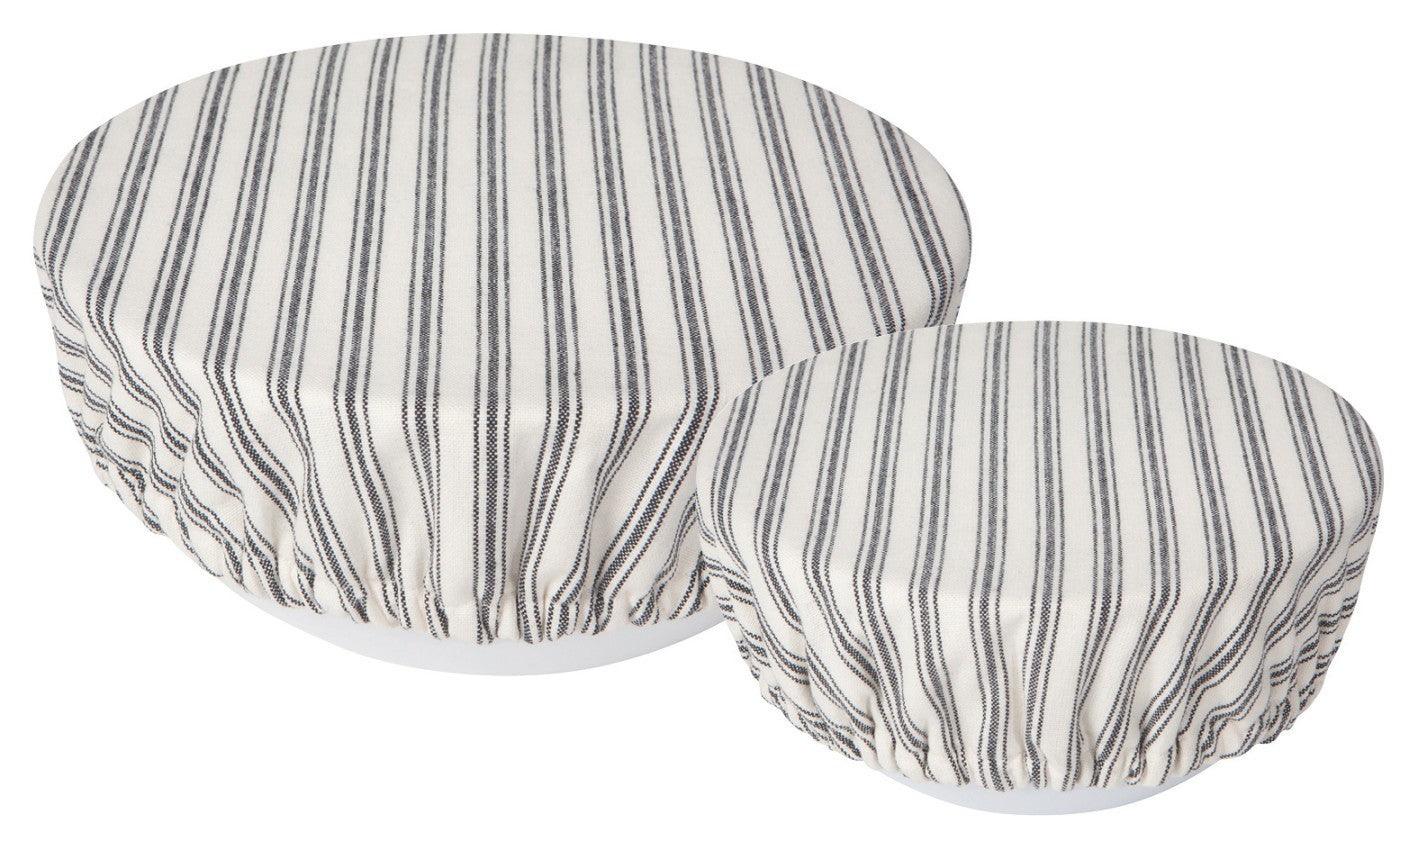 View Now Designs - Bowl Covers, Ticking Stripe